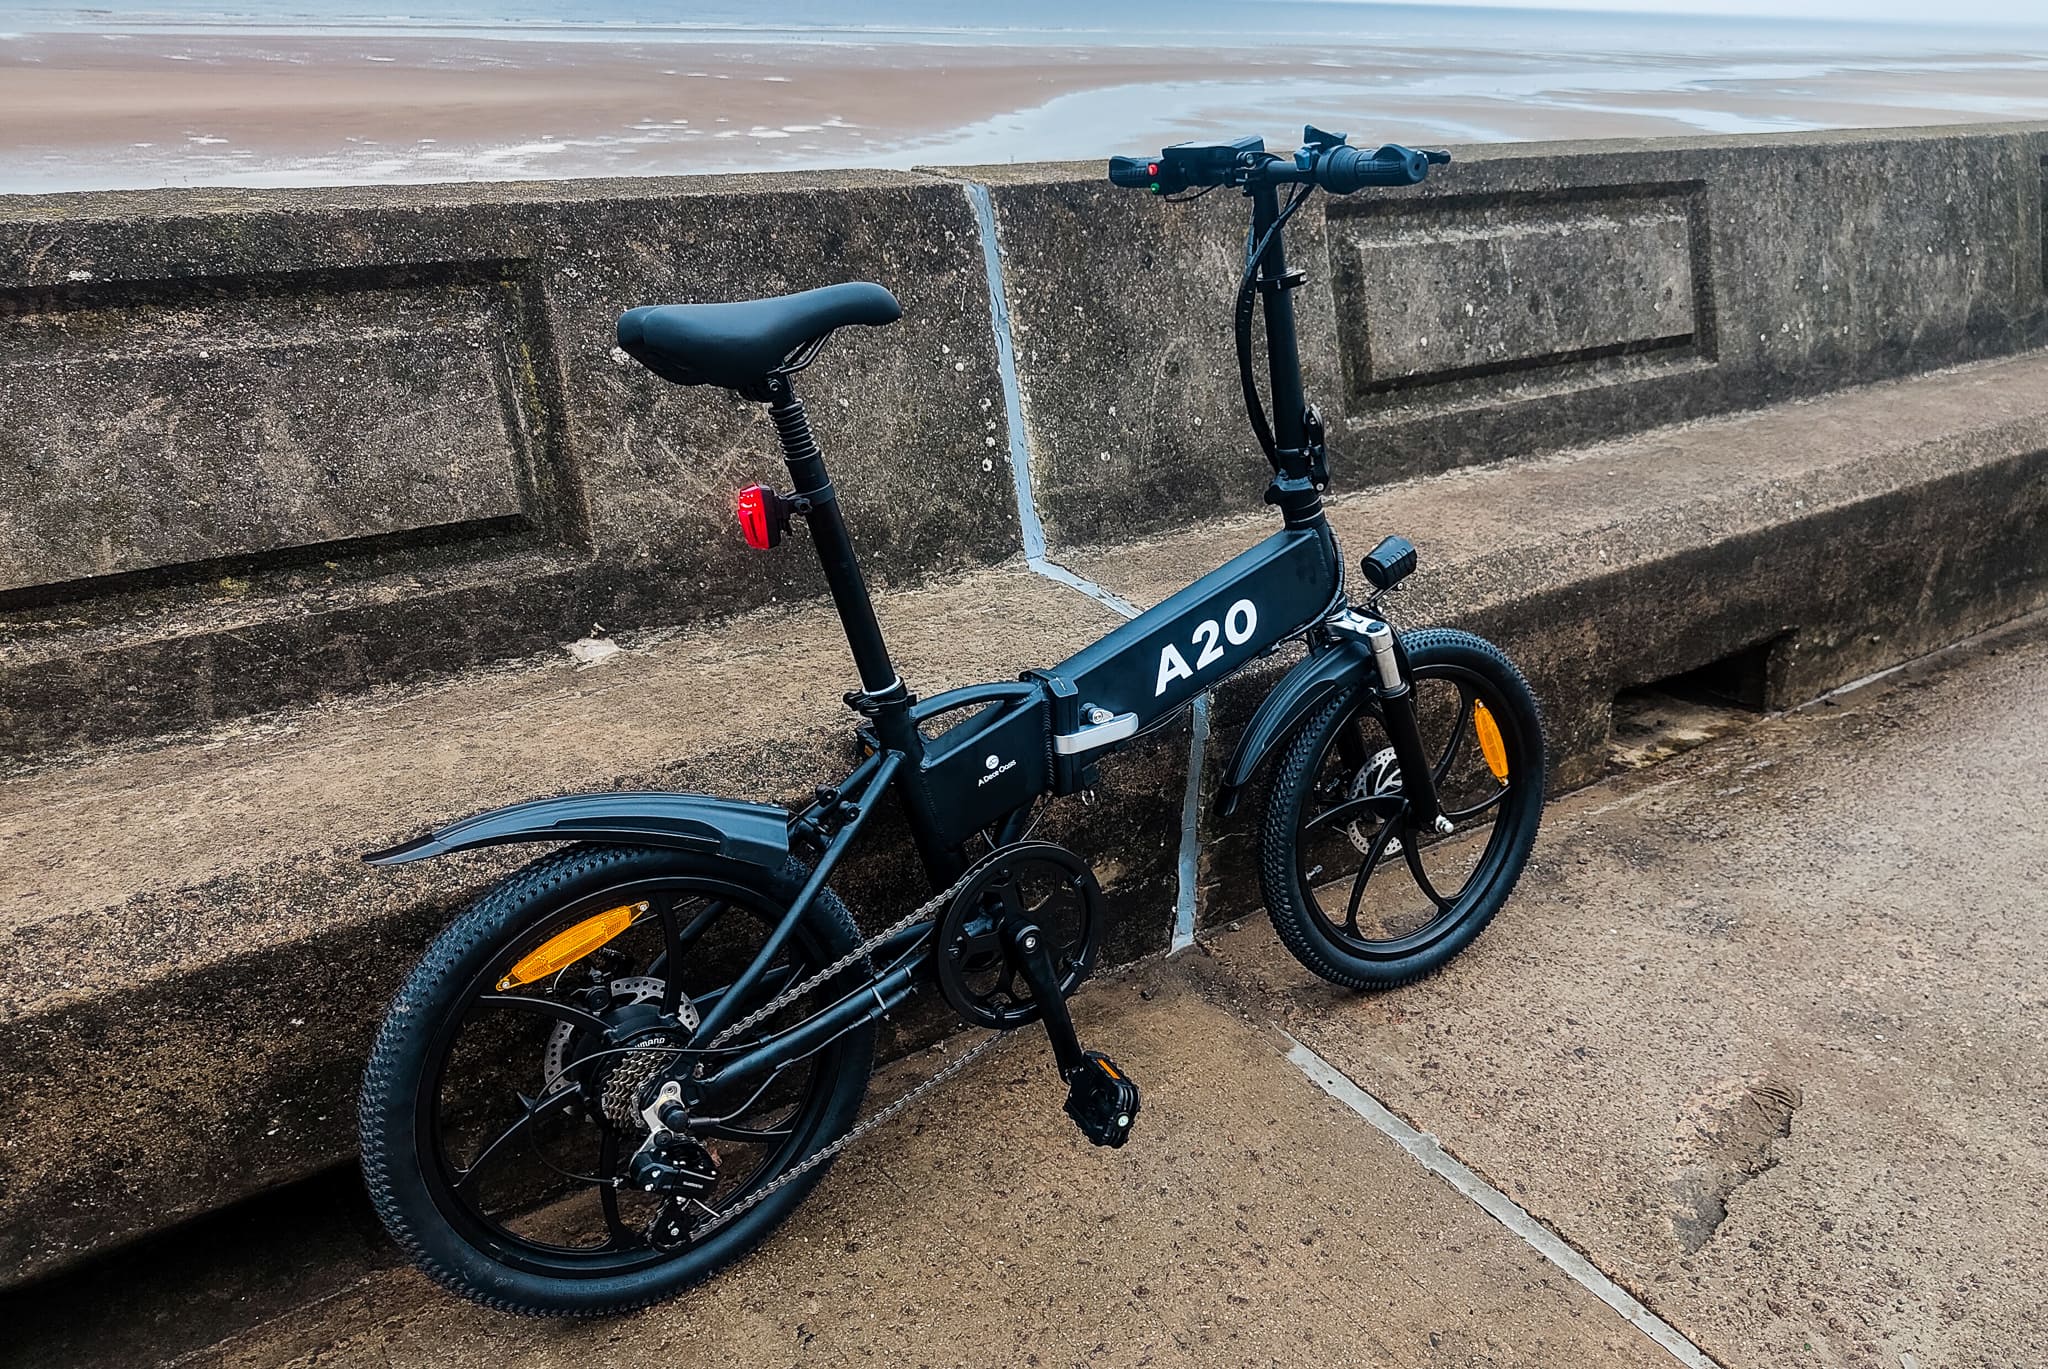 ADO A20 Ebike Review: Ditch the electric scooter and get this affordable folding electric bike